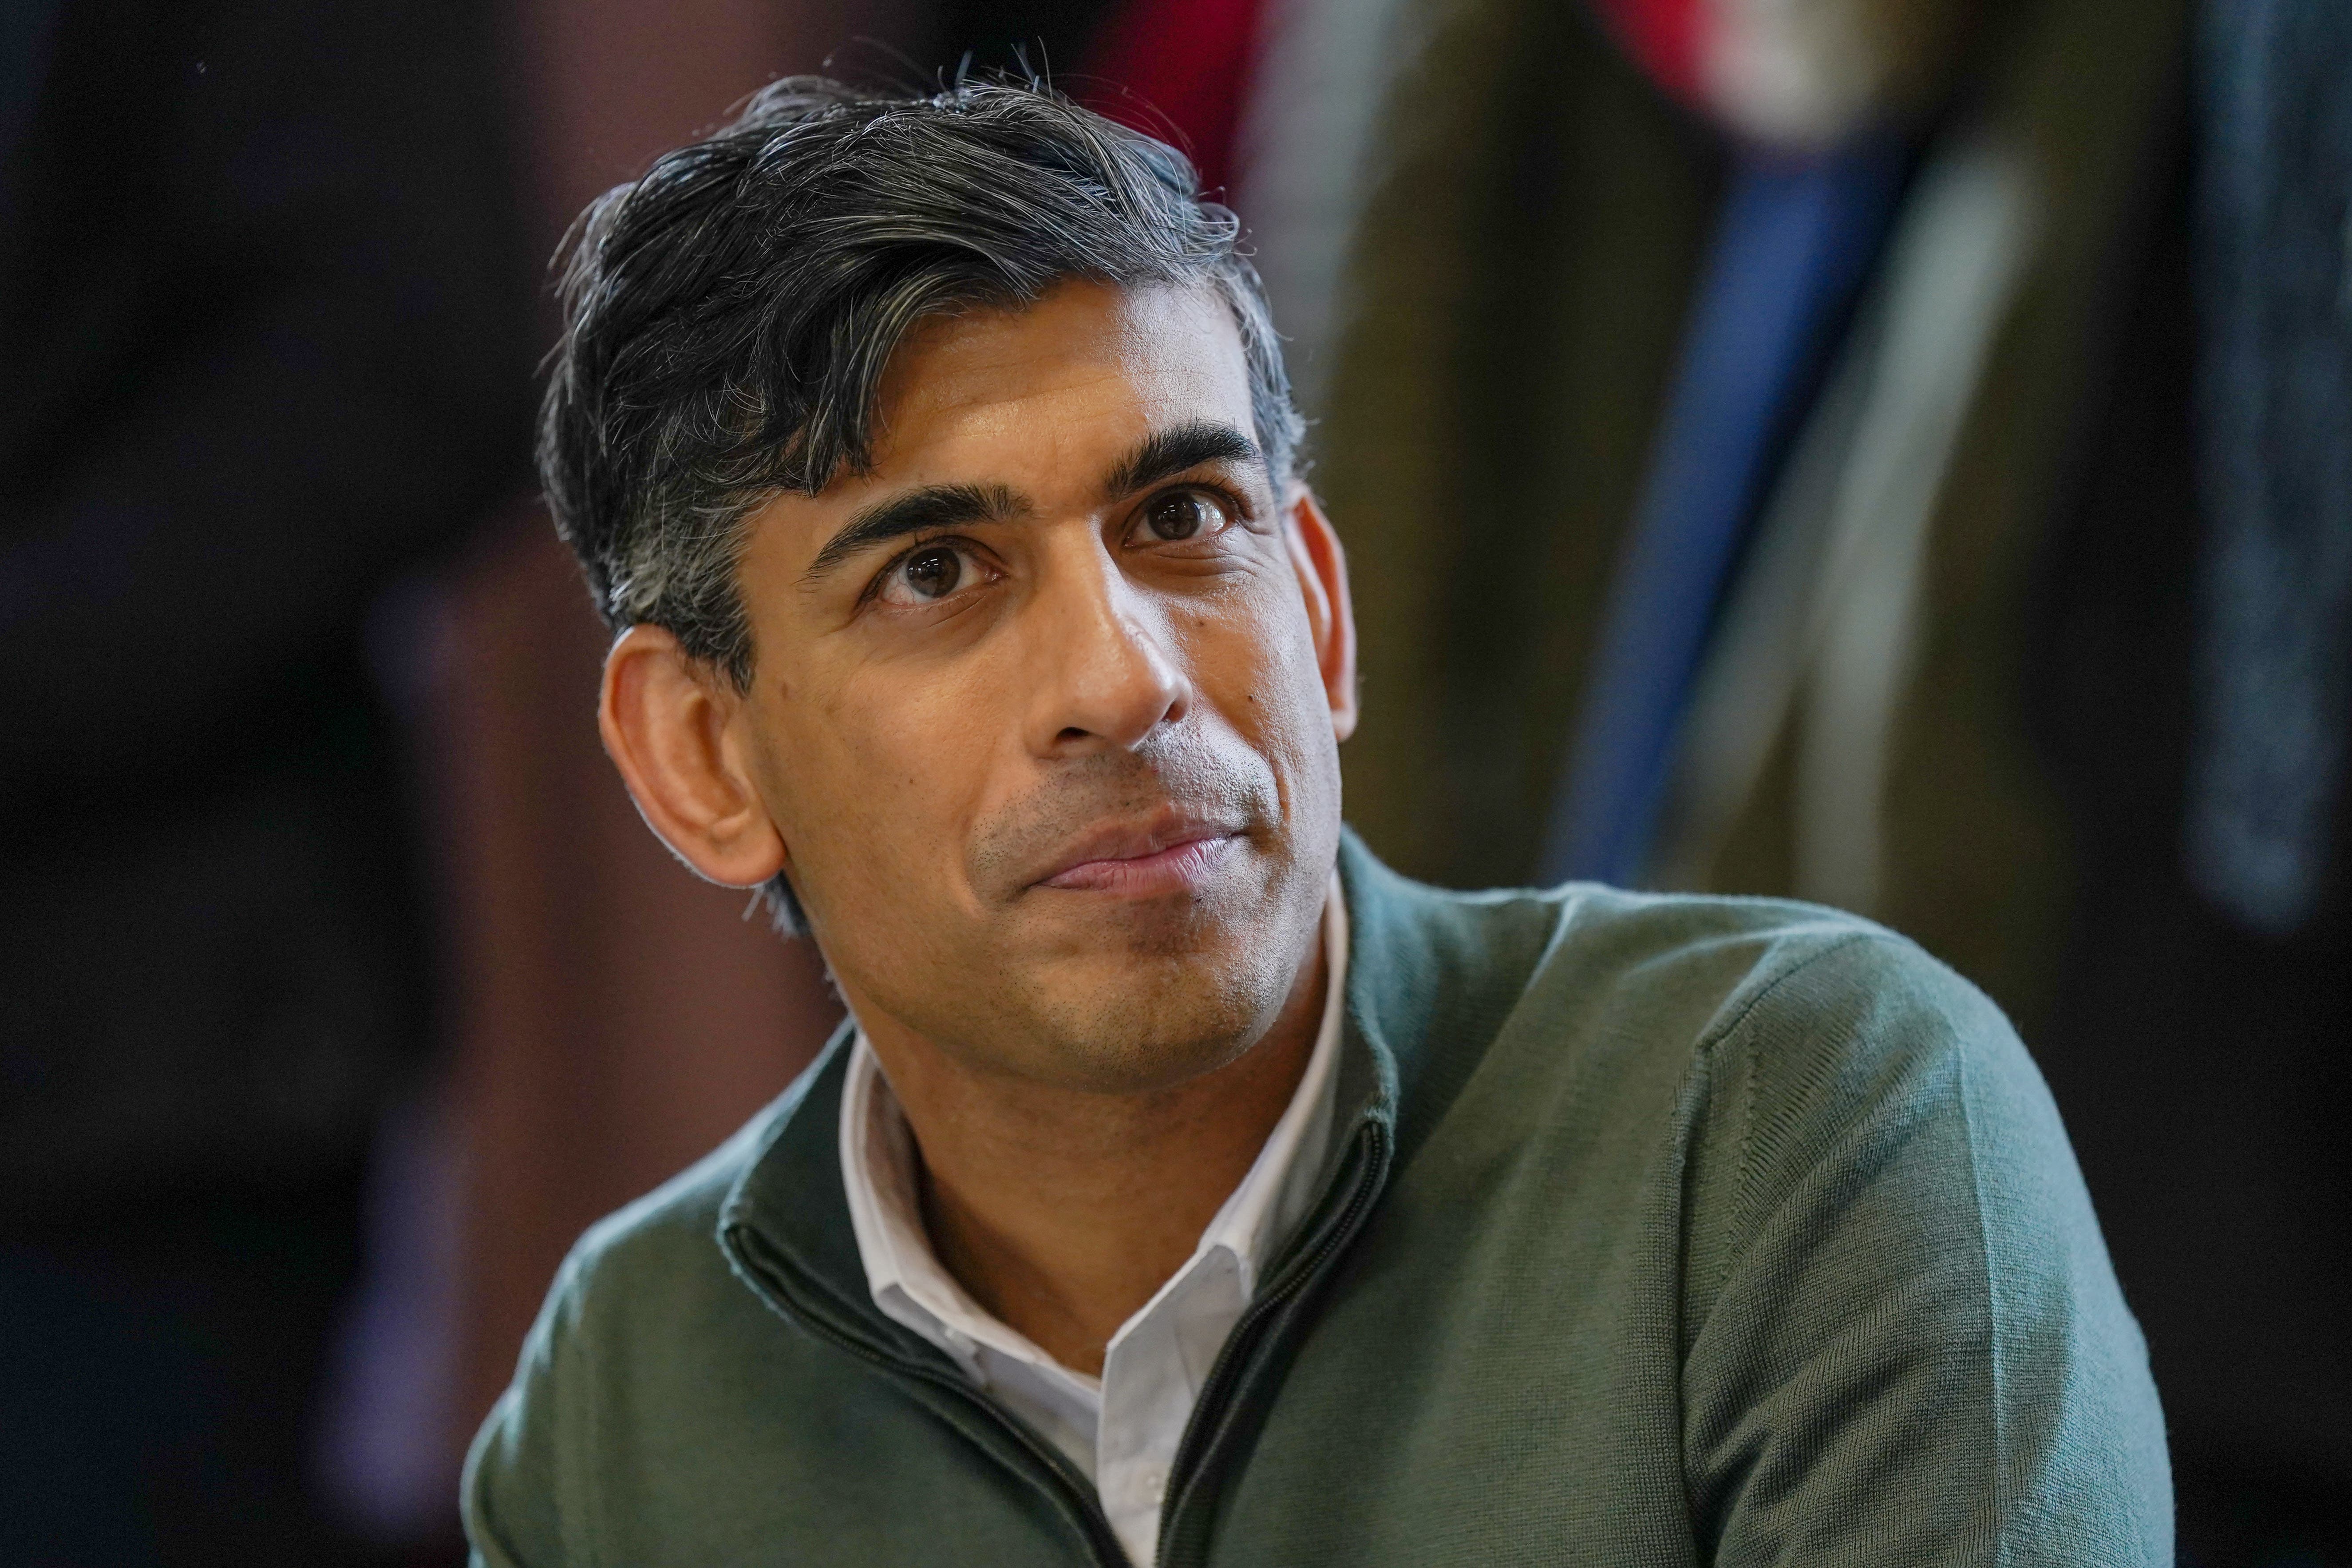 Rishi Sunak’s party has fallen far behind Keir Starmer’s Labour party in the polls